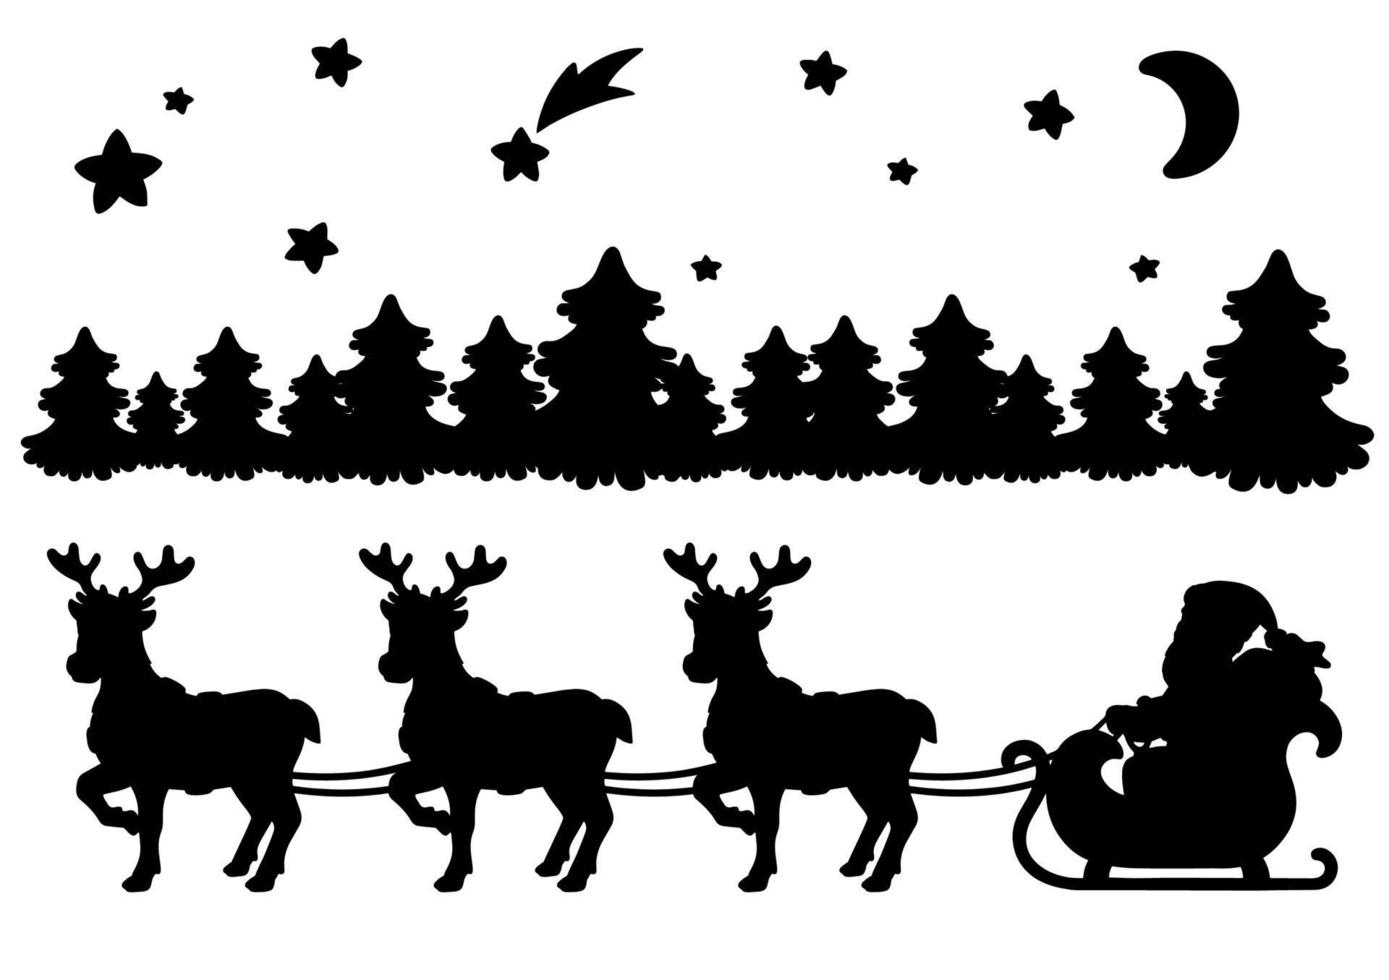 Santa Claus carries Christmas presents on a reindeer sleigh. Black silhouette. Design element. Vector illustration isolated on white background. Winter forest.